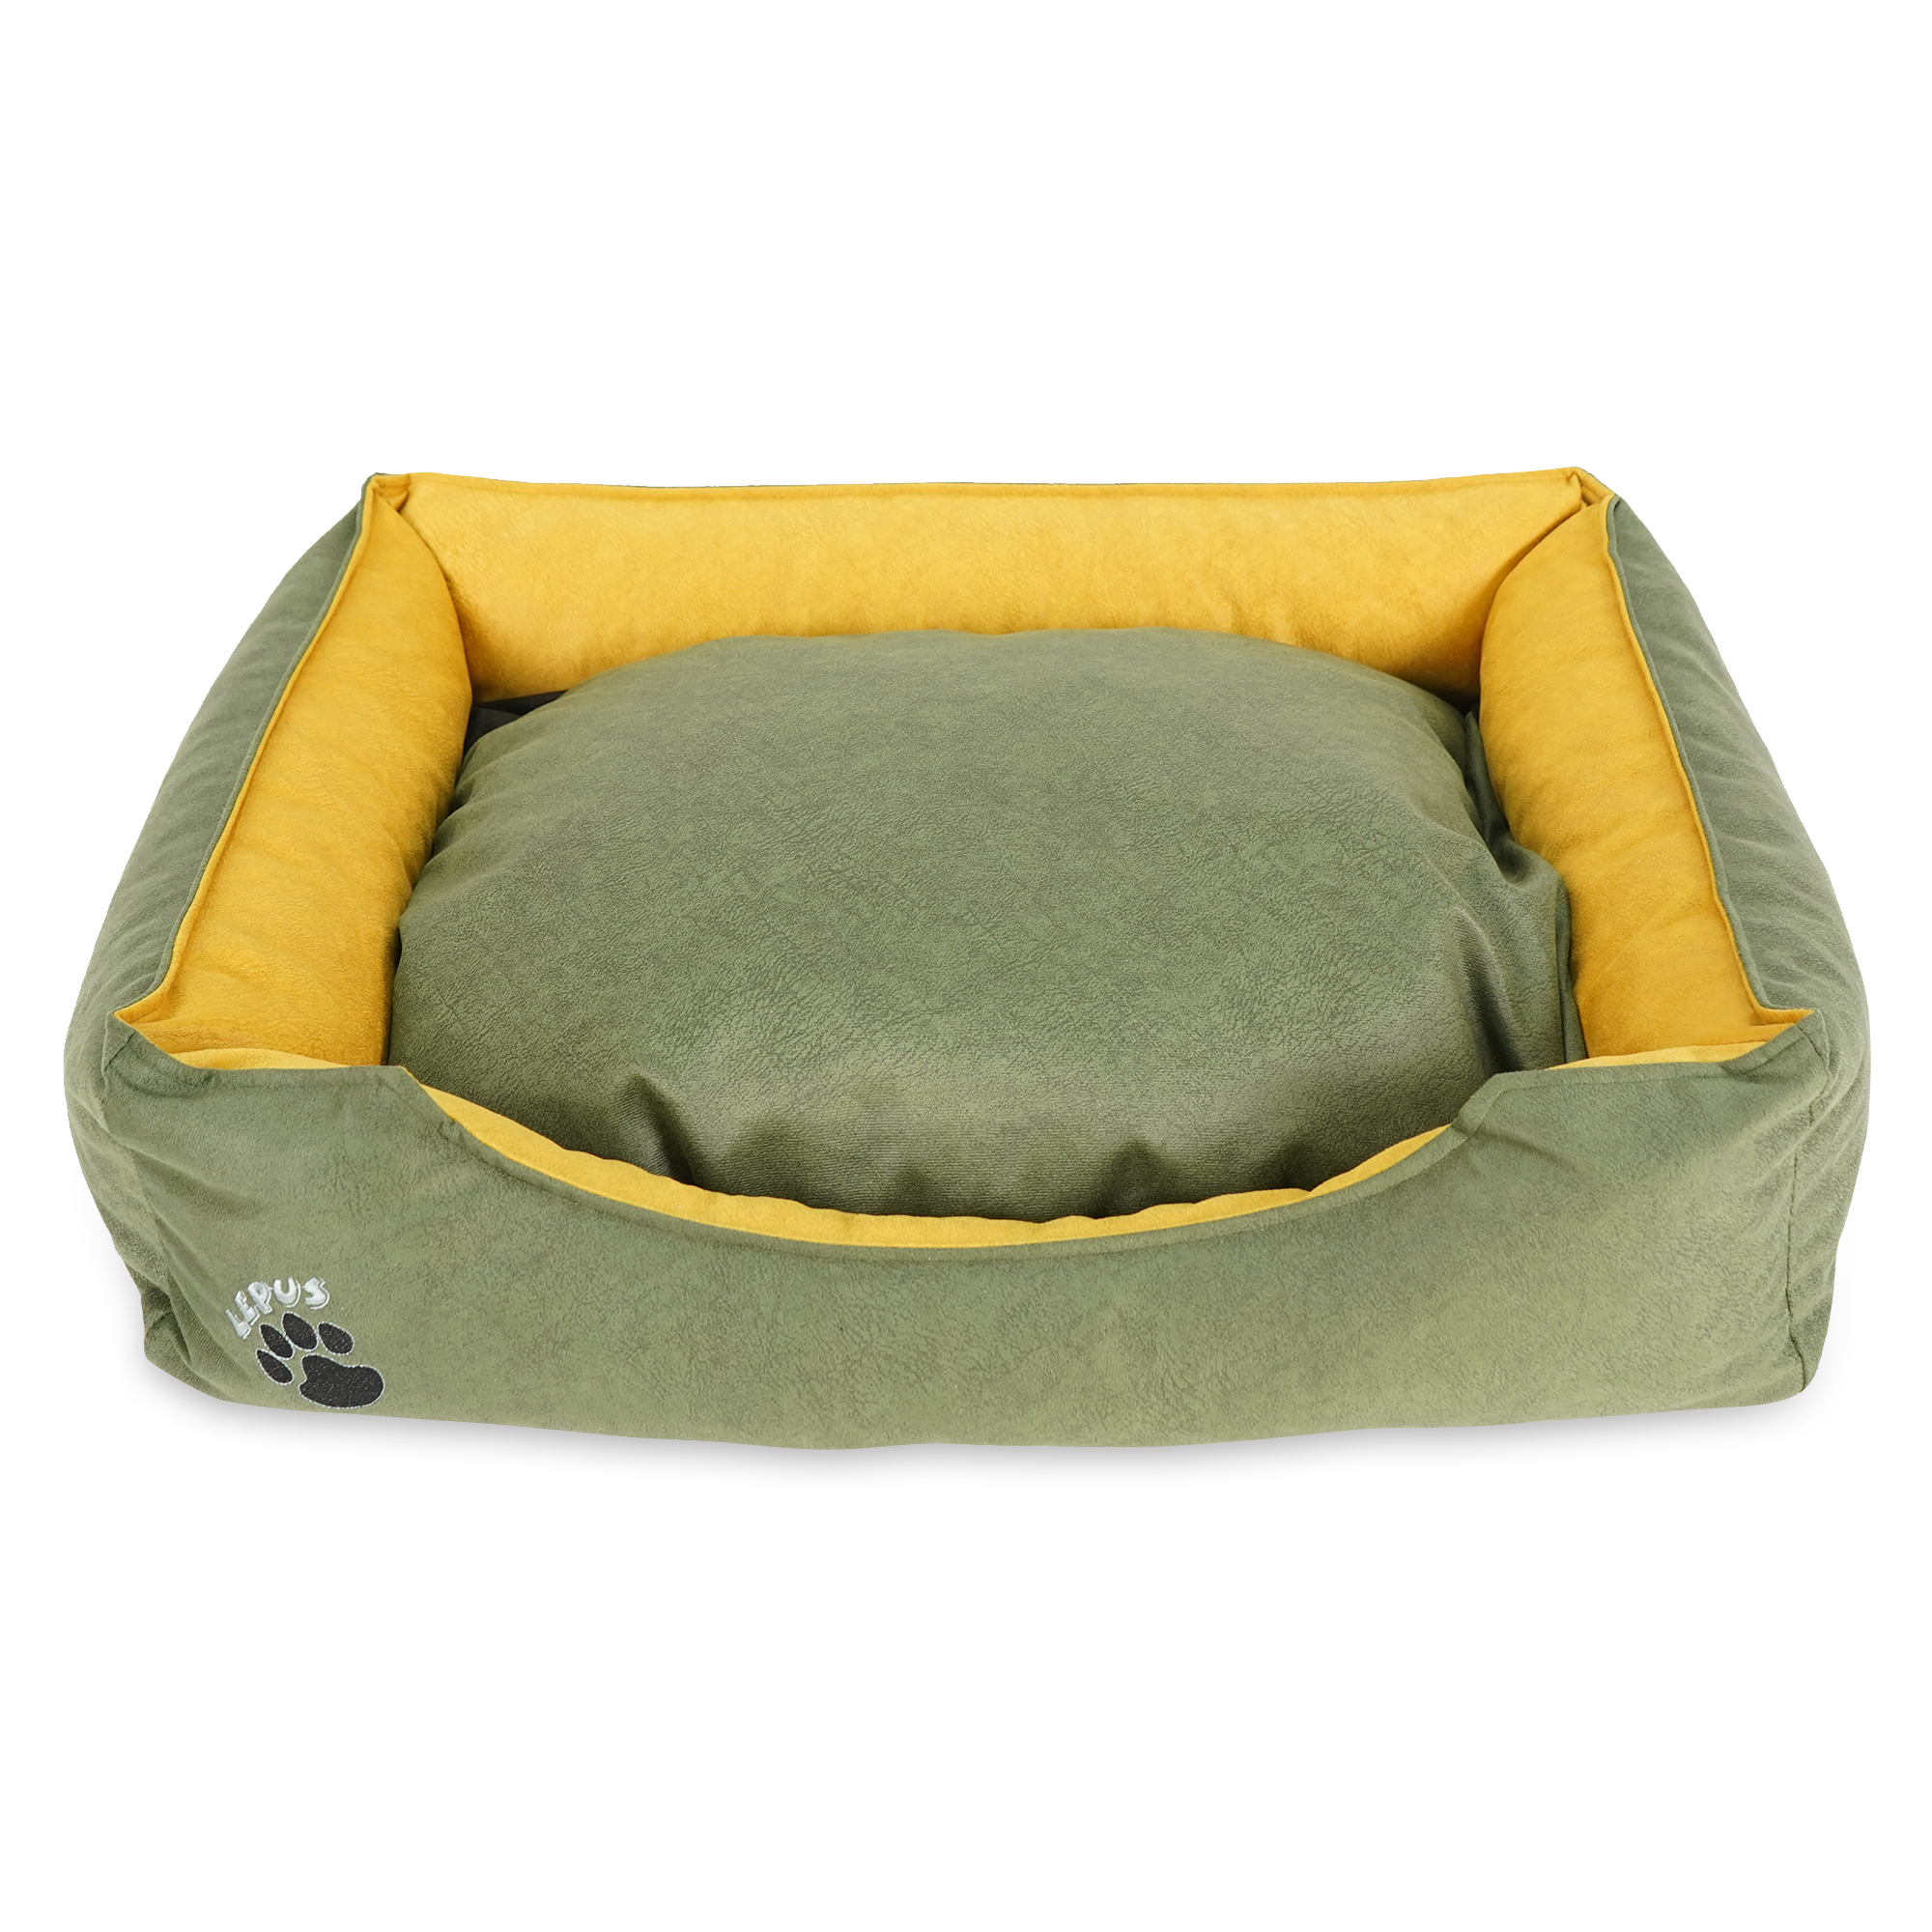 SUSSEXHOME Pets 23.5 x 17.3 x 7 Inches Washable Dog Bed for Medium Dogs - Durable Waterproof Sofa Dog Bed with Sides - (GREEN) - image 1 of 7